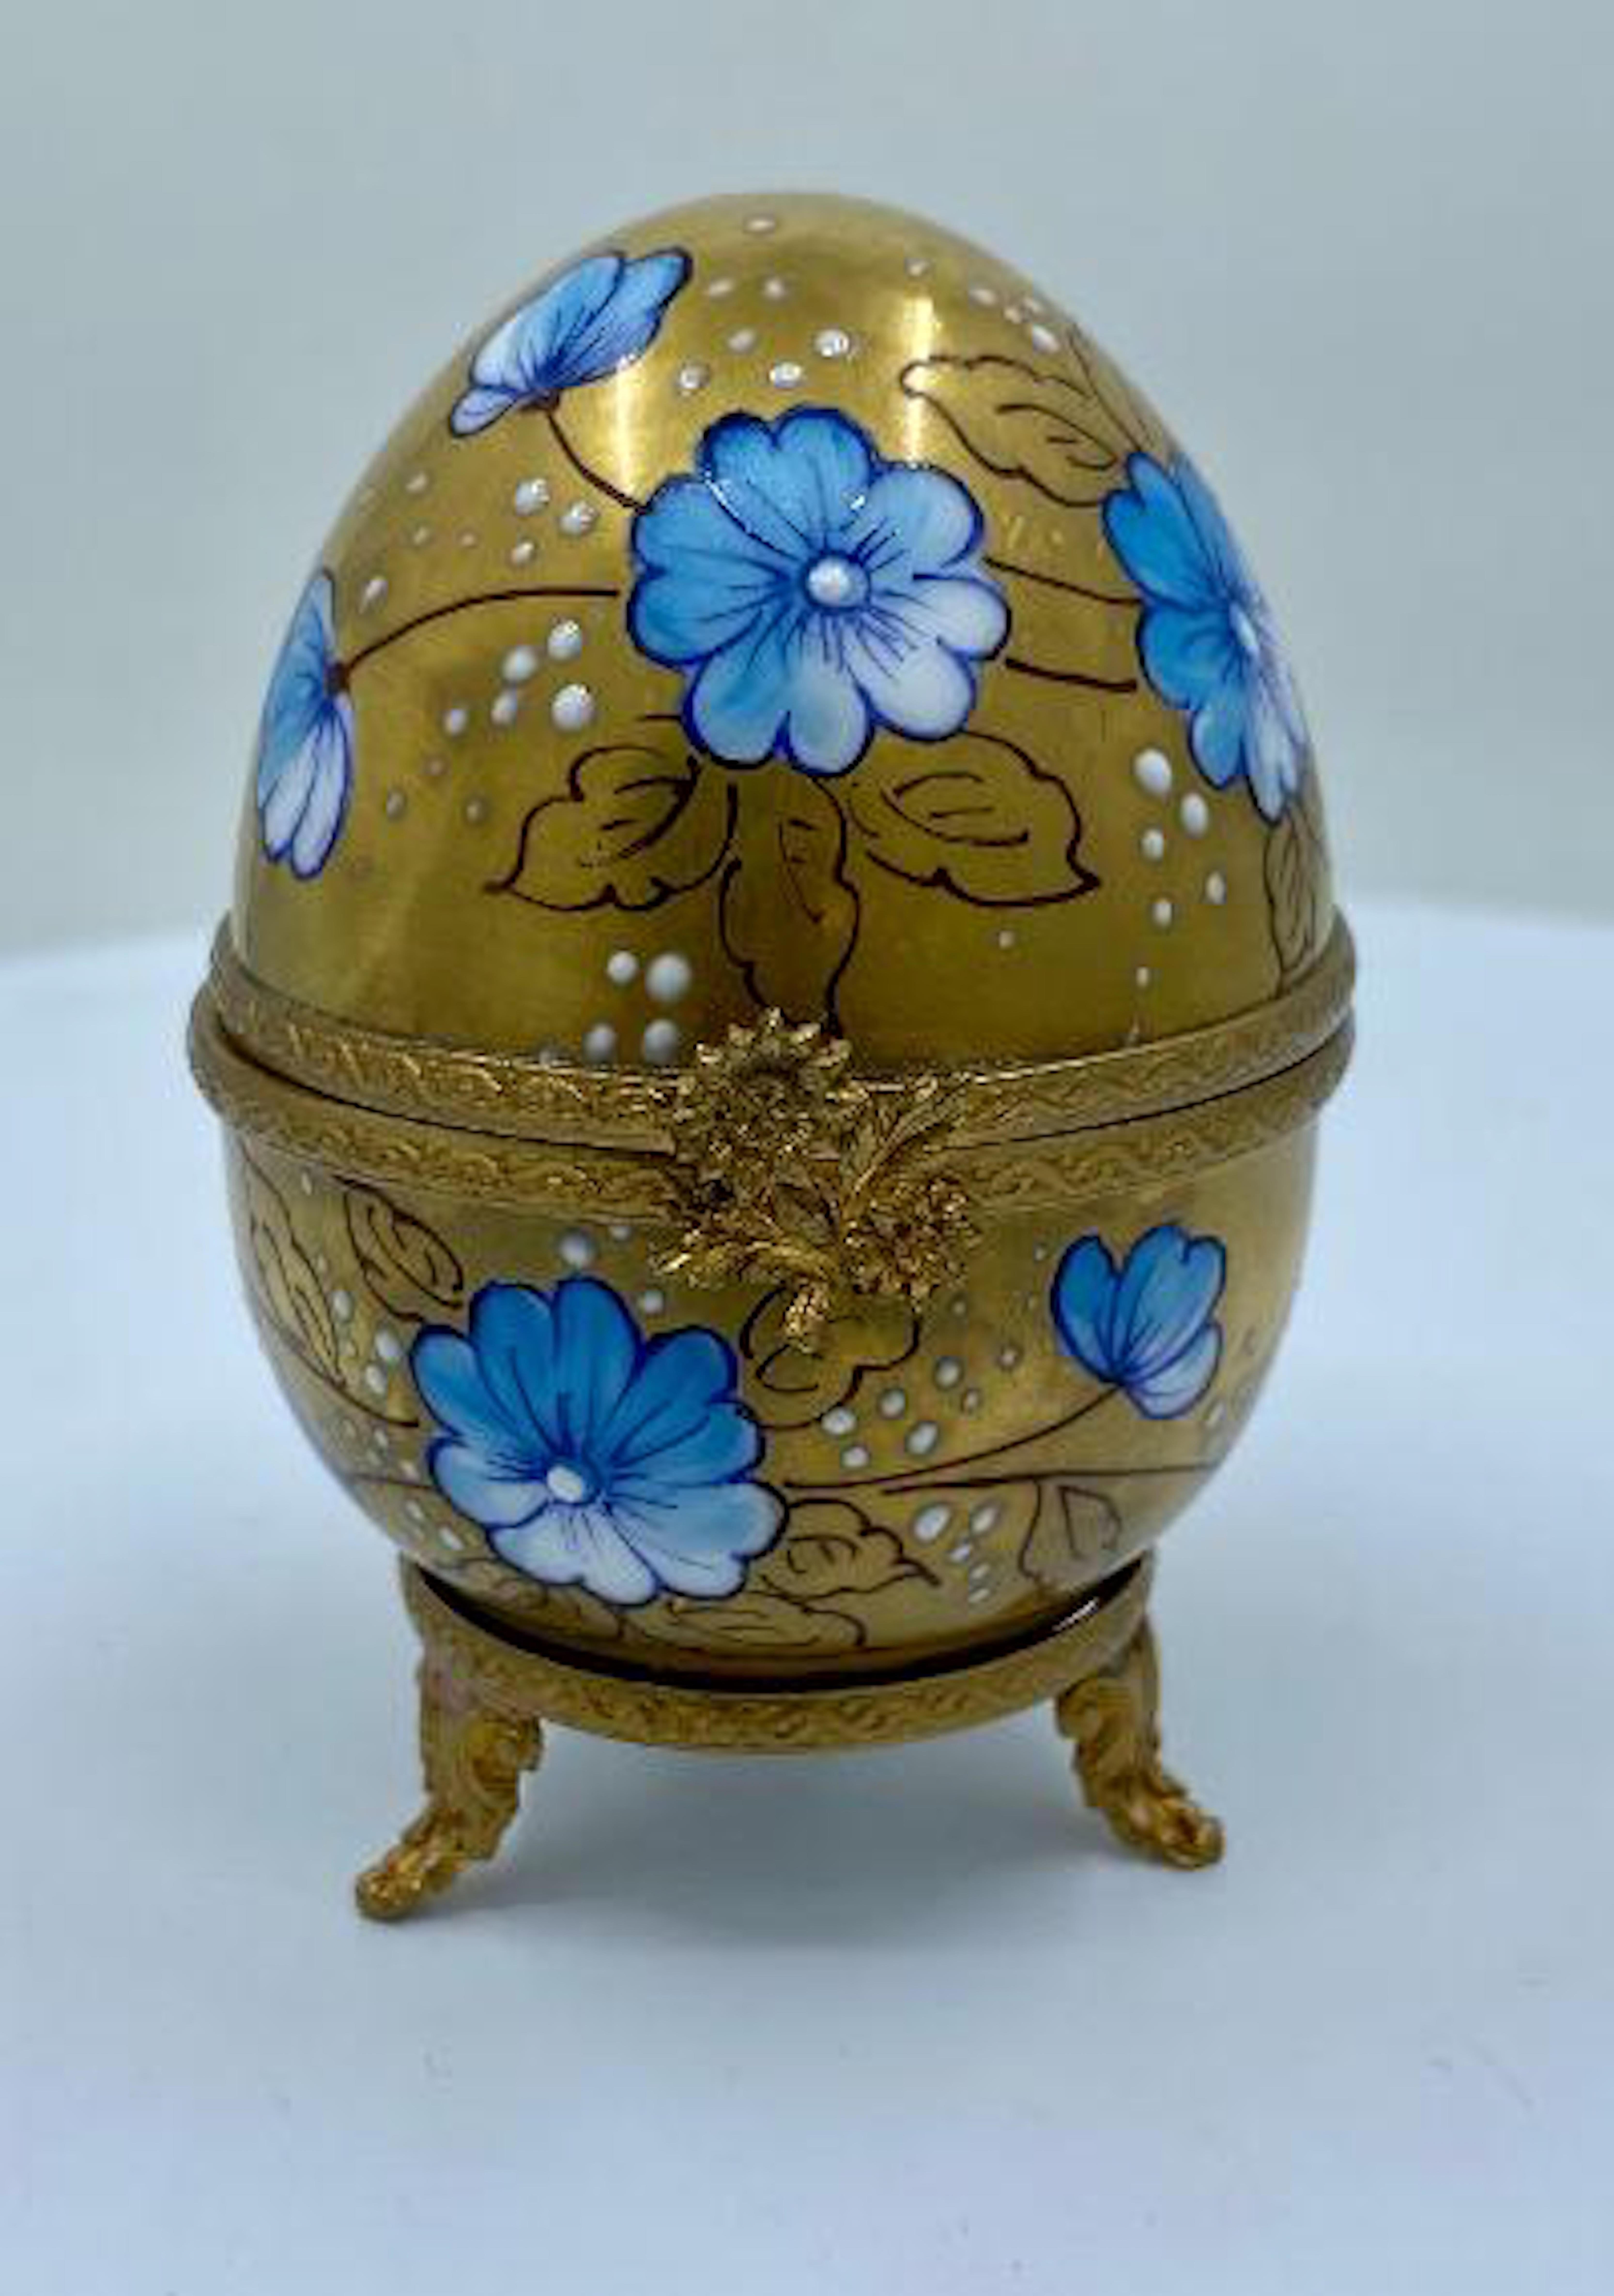 Exquisitely handmade and hand painted miniature Limoges porcelain egg shaped box with a hinged lid is decorated with light blue and white flowers accented with high relief accents over a lavish 24-karat gold background. The porcelain box and lid